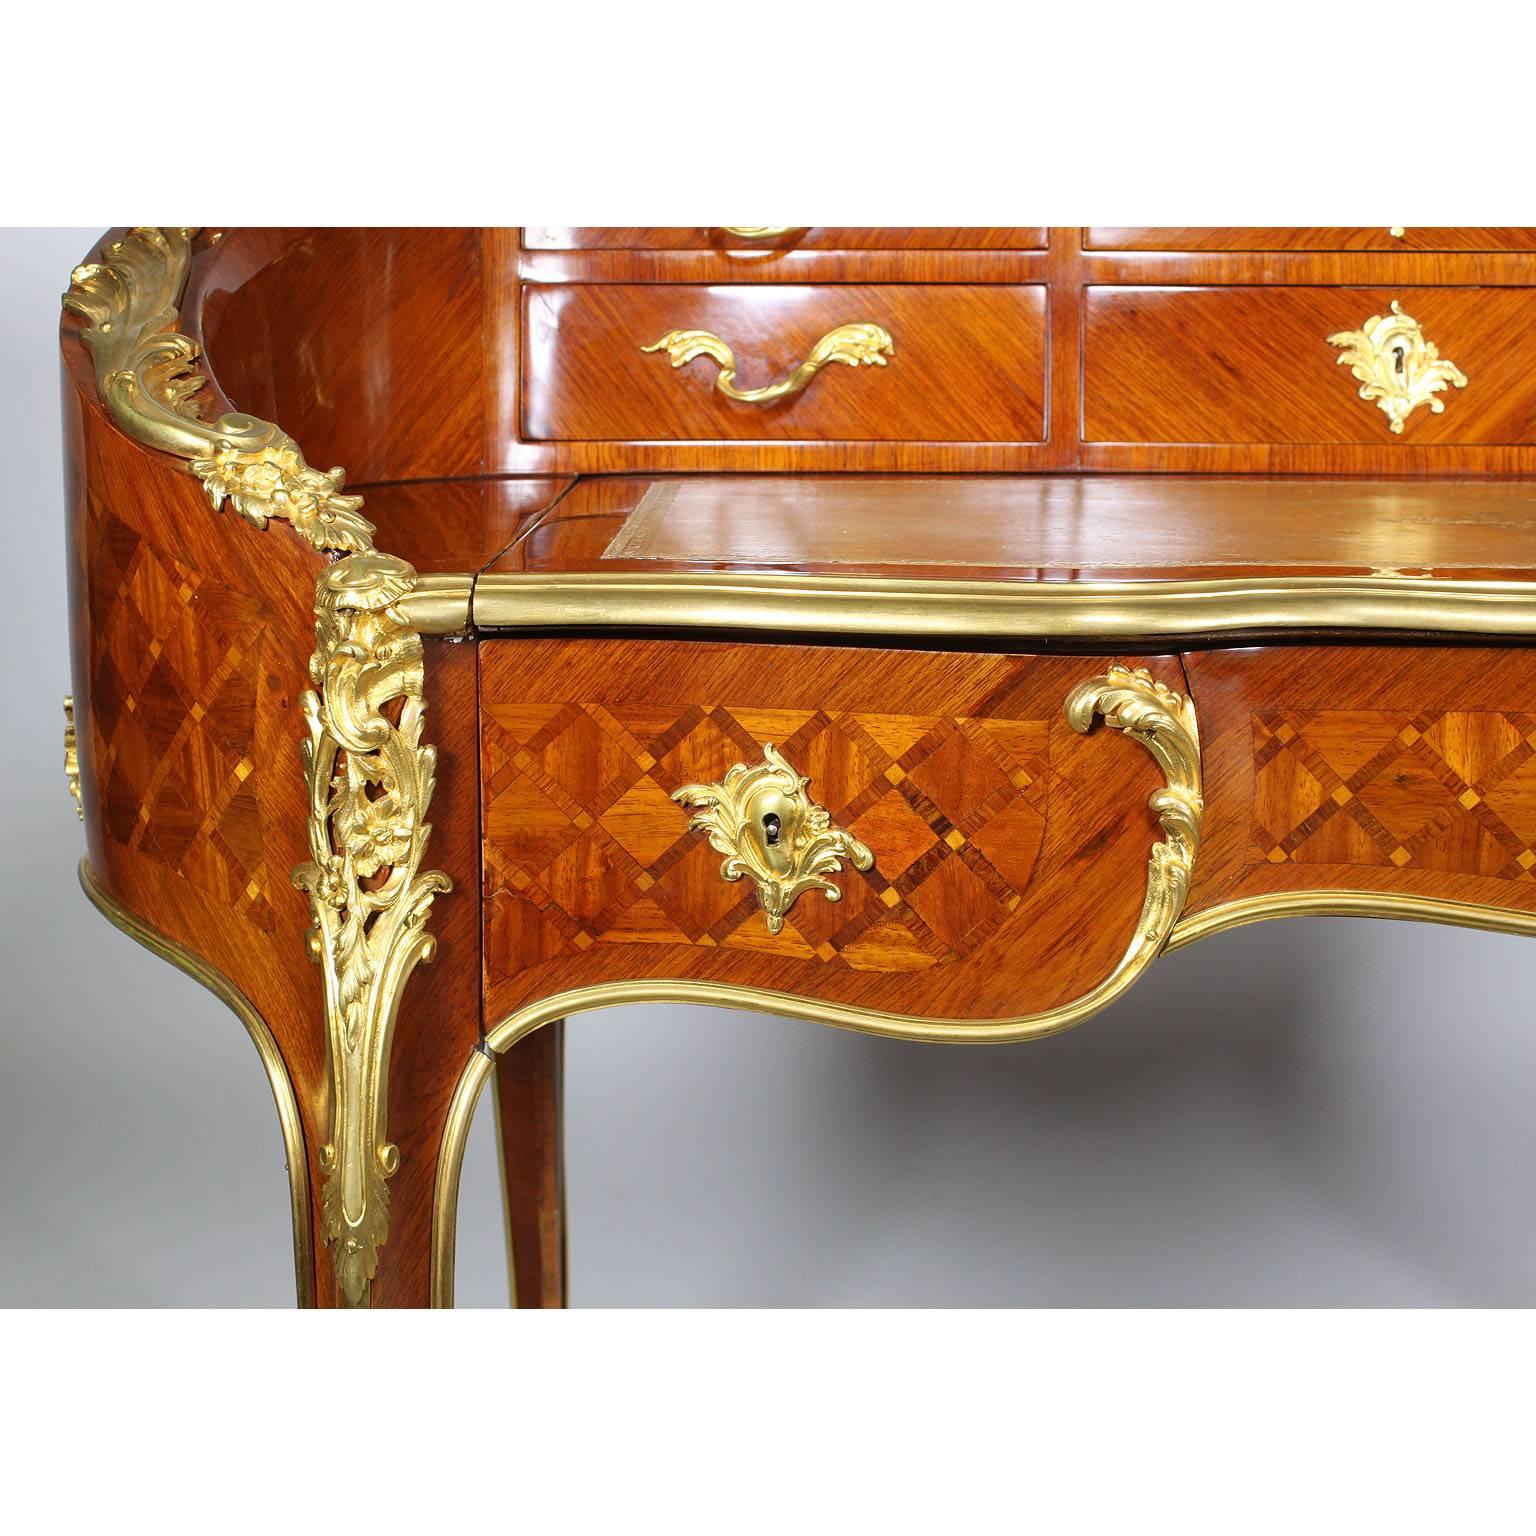 19th Century Louis XV Style Gilt-Bronze Mounted Secretary, Attributed to Millet 1